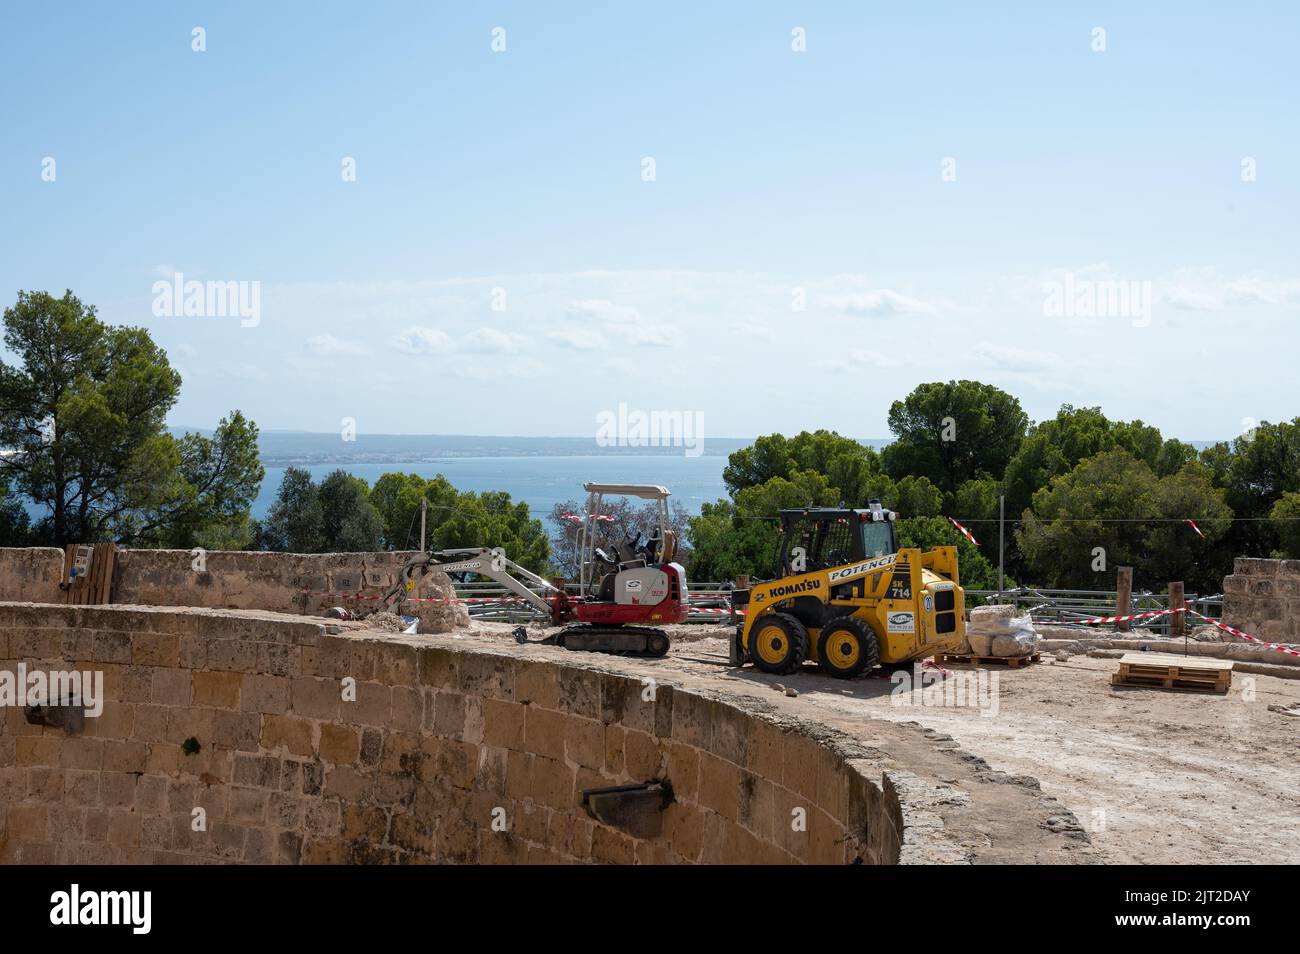 A side view of a mini excavator and a skid steer loader at the construction site near green trees Stock Photo